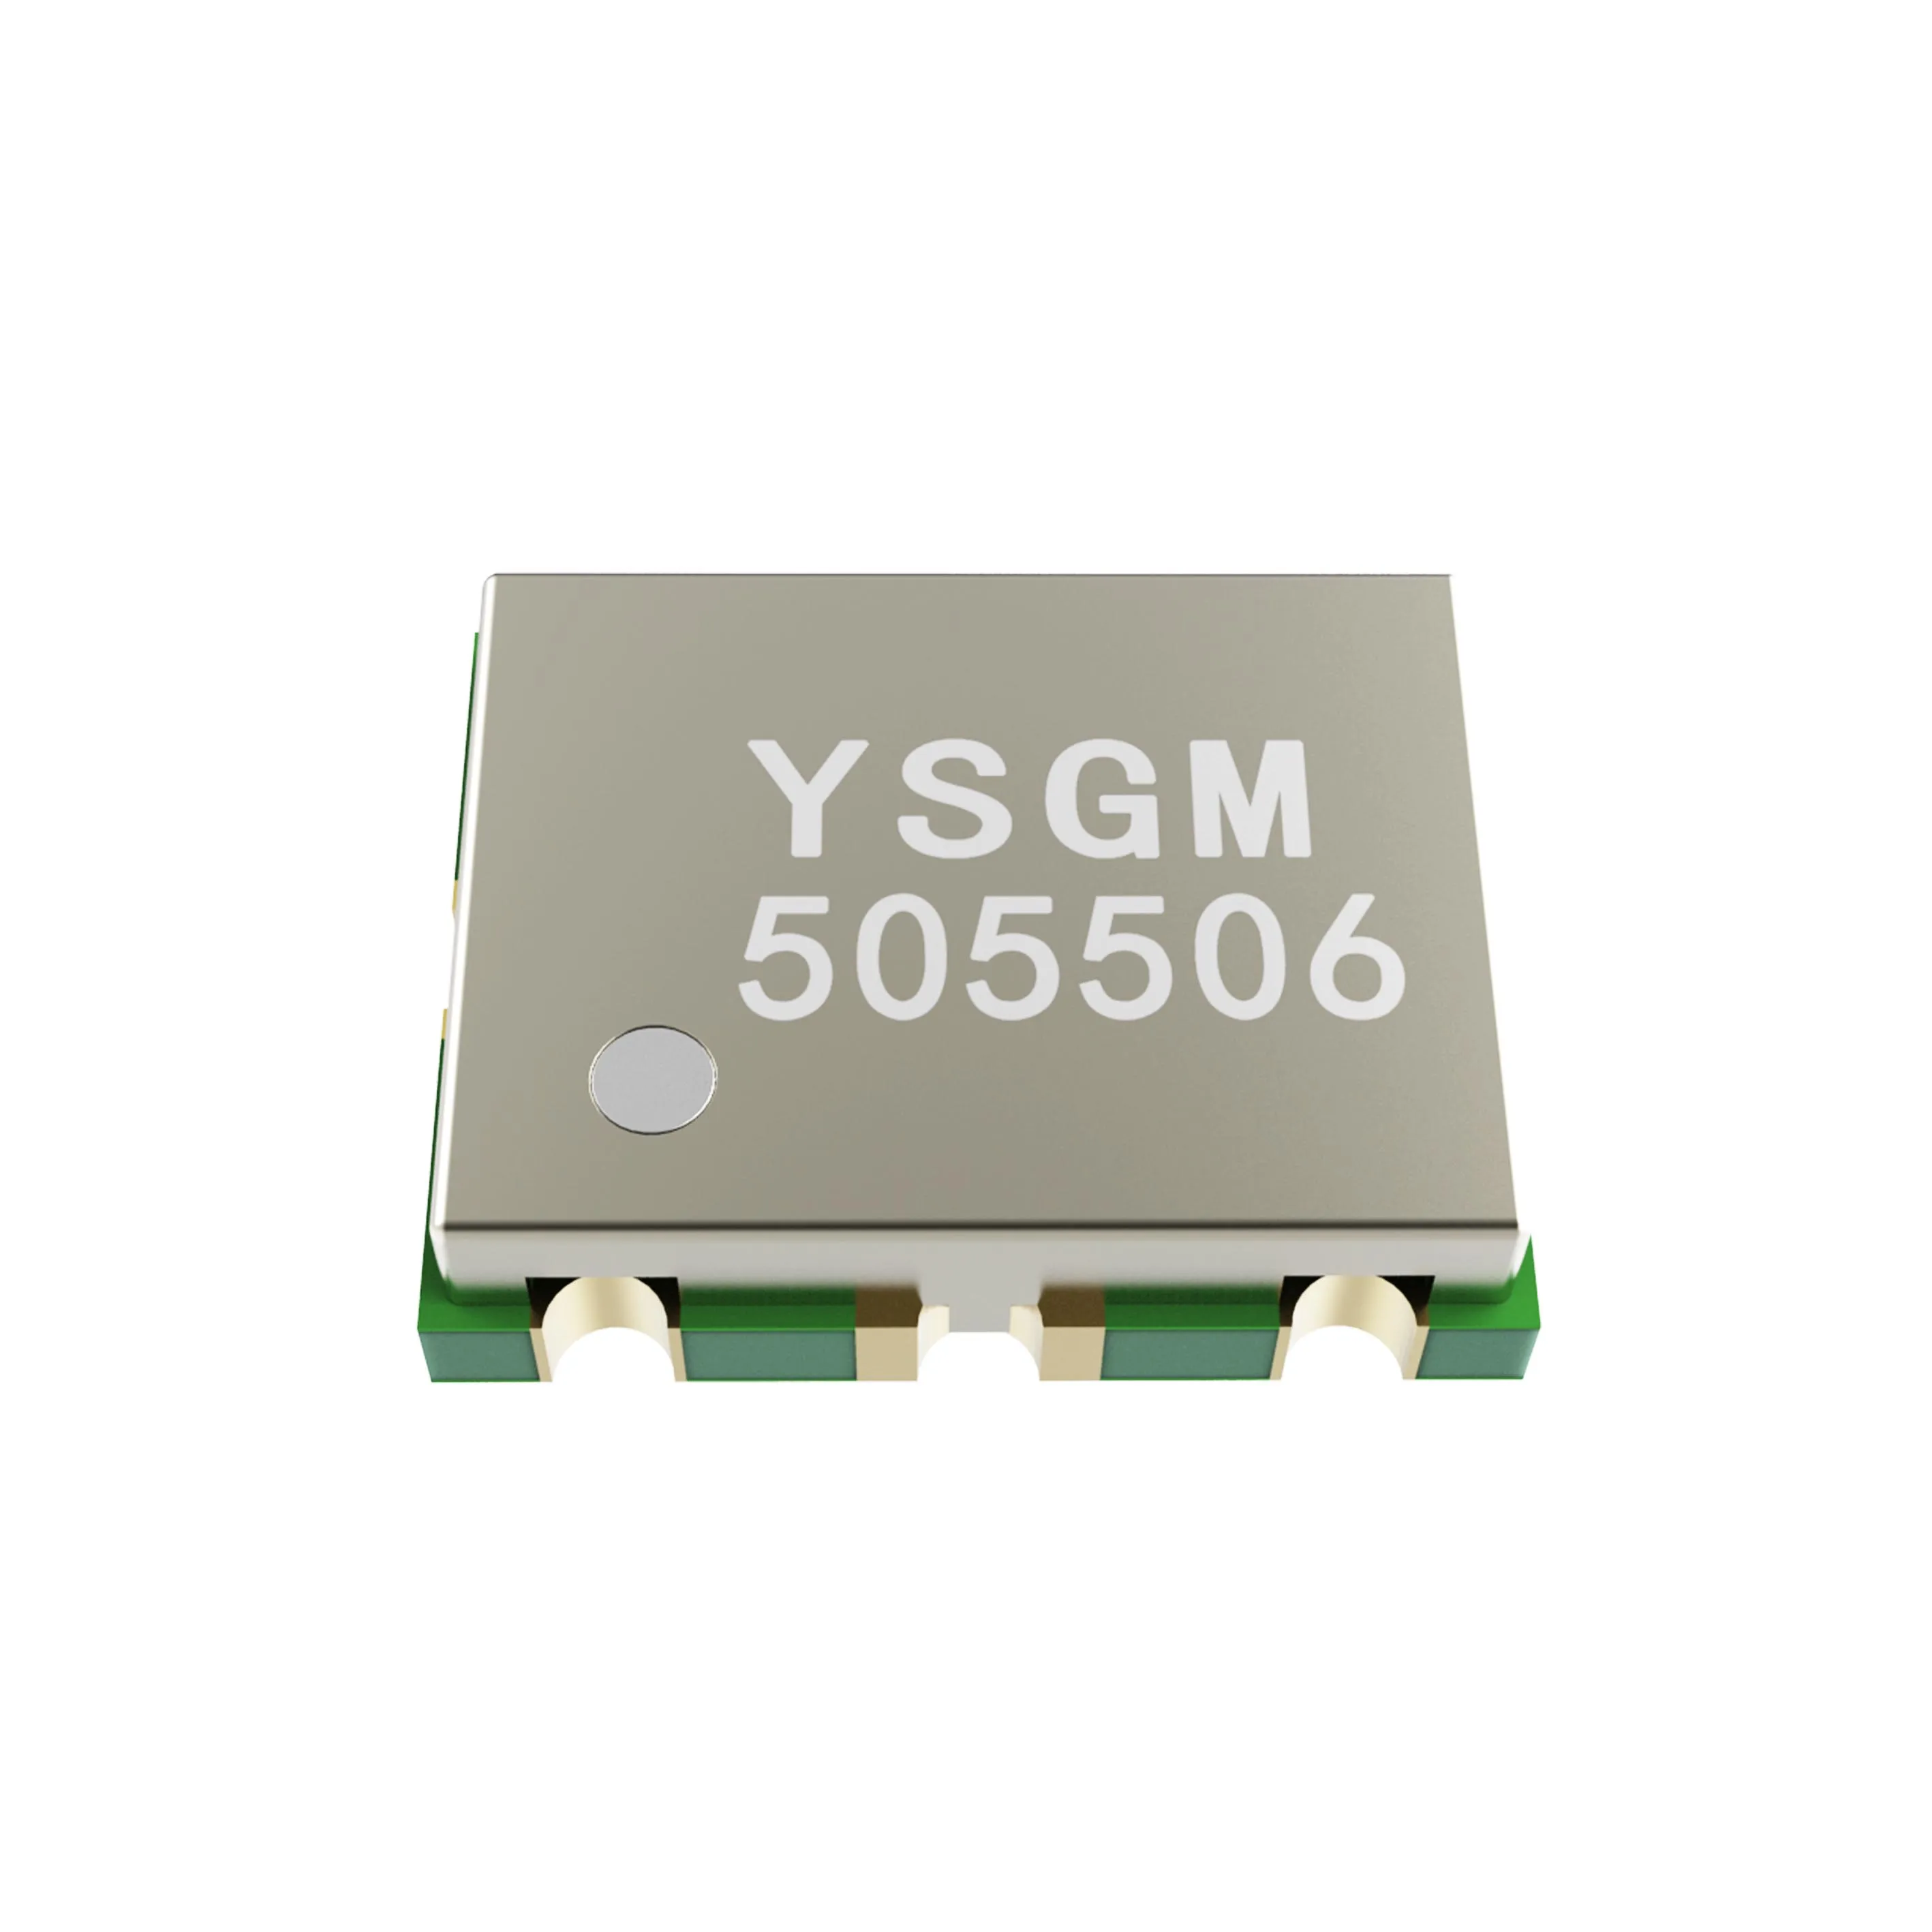 VCO Voltage Controlled Oscillator with Buffer Amplifier for IEEE 802.11a/n/ac 5150MHz-5350MHz 1 75g 1750mhz voltage controlled oscillator signal source